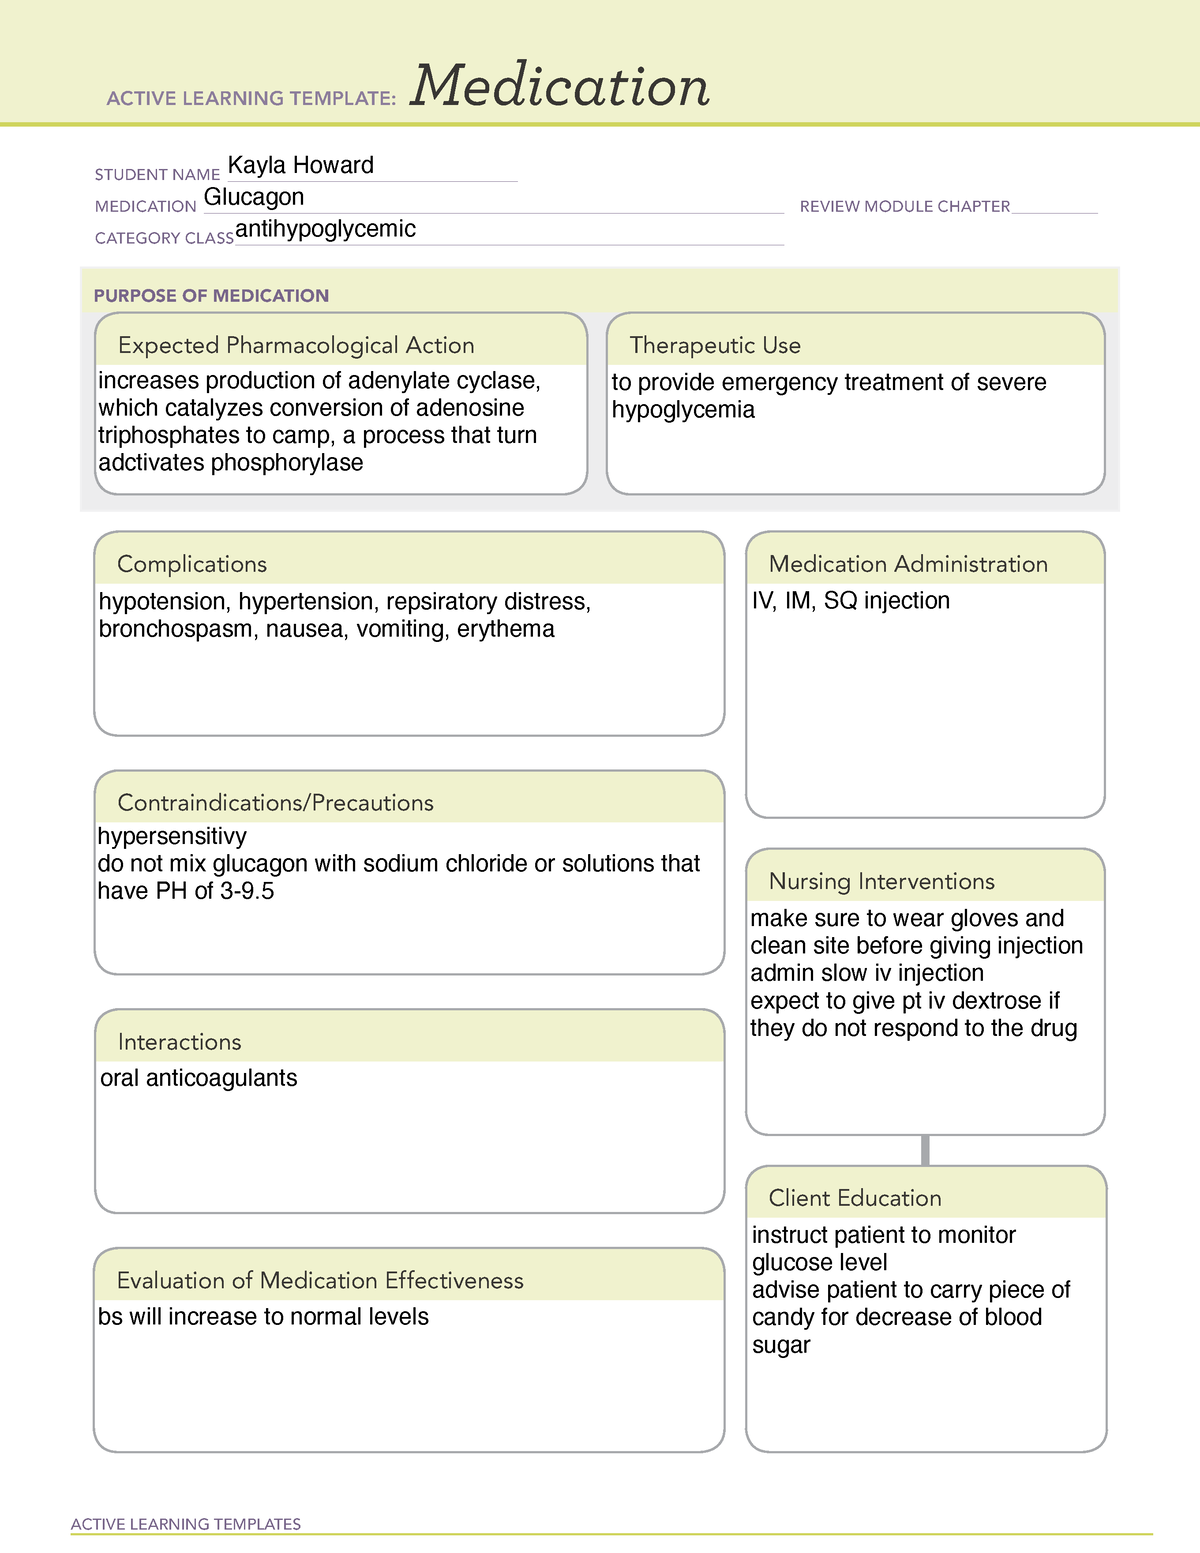 Glucagon med sheets ACTIVE LEARNING TEMPLATES Medication STUDENT